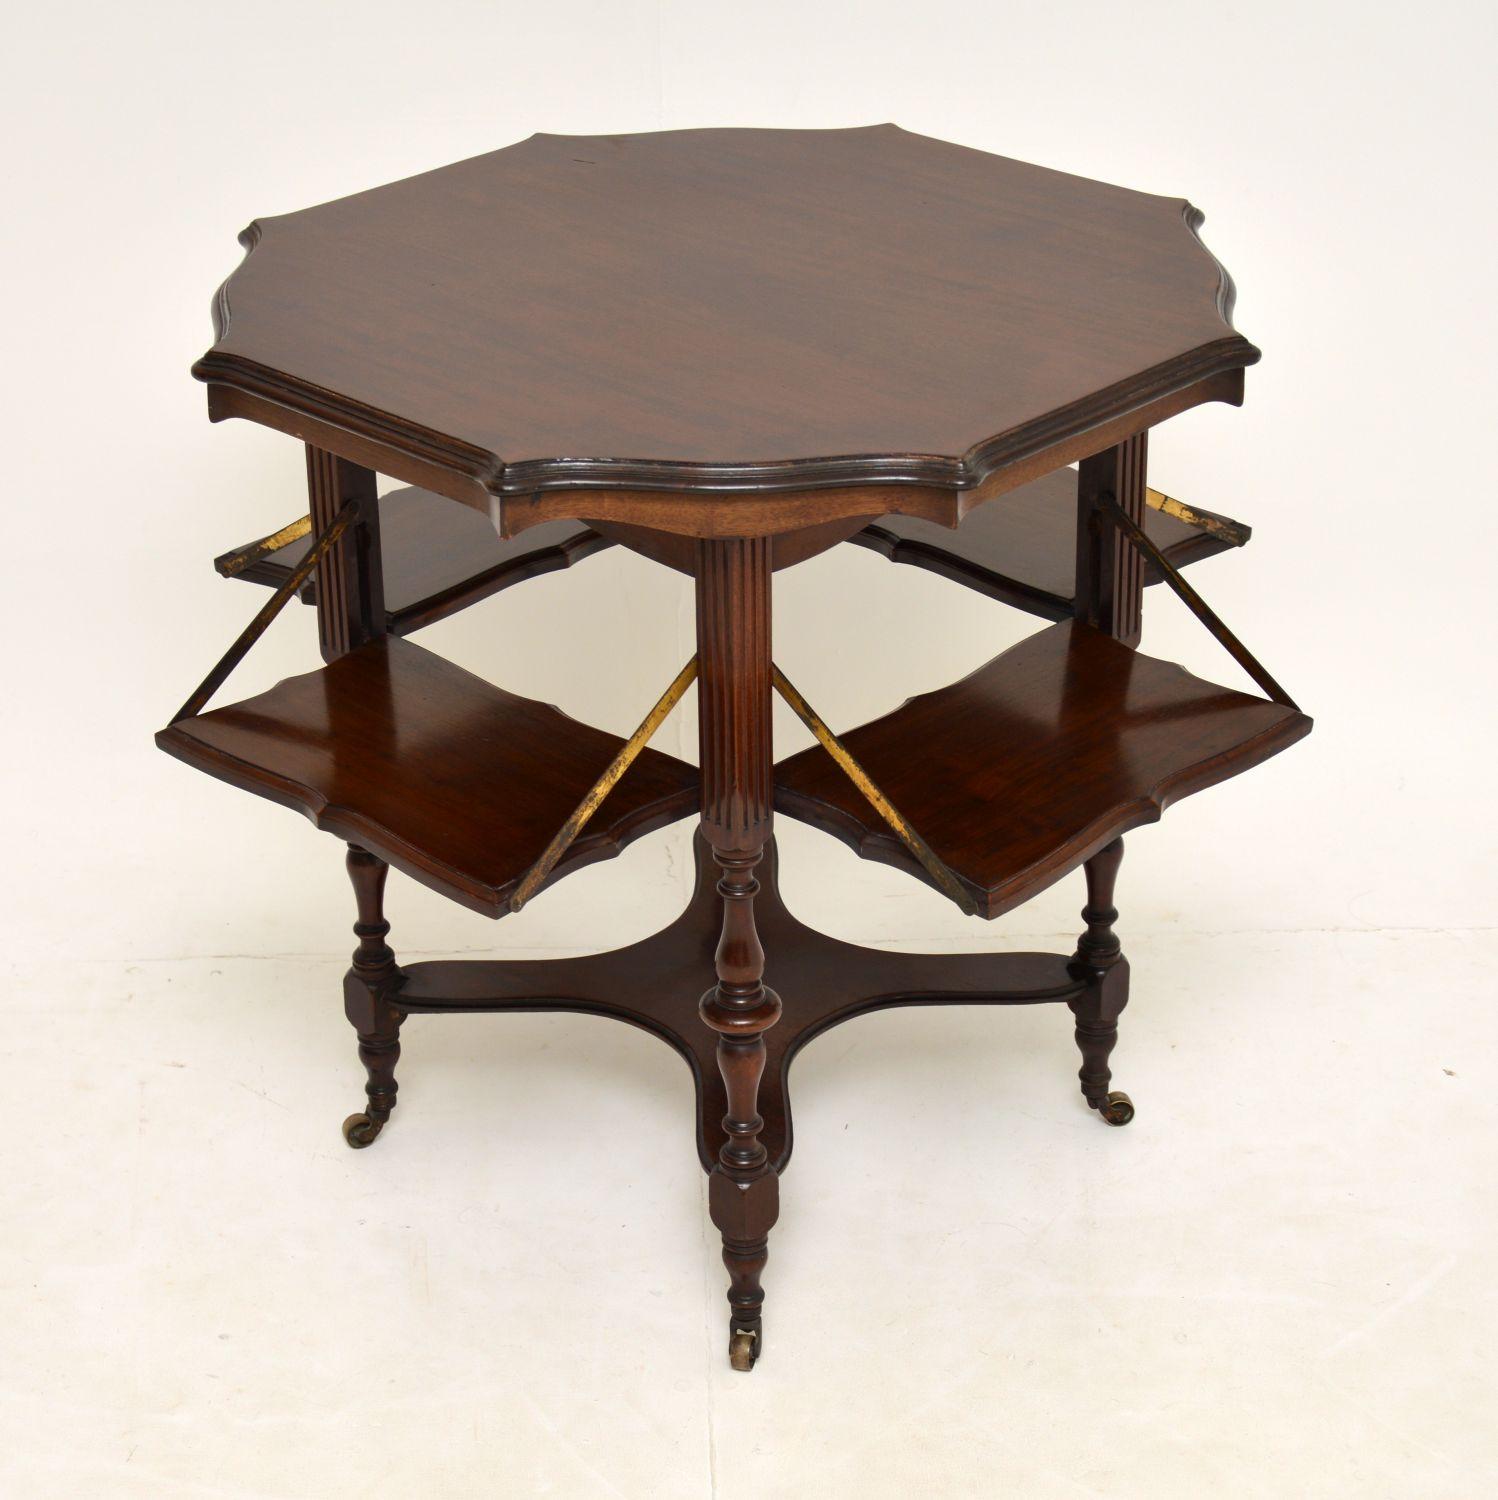 A smart and interesting antique occasional table. This dates from around the 1880-1890 period.

It is of lovely quality, with a beautifully shaped octagonal top. It sits on turned and fluted legs, which terminate in original brass casters.

This